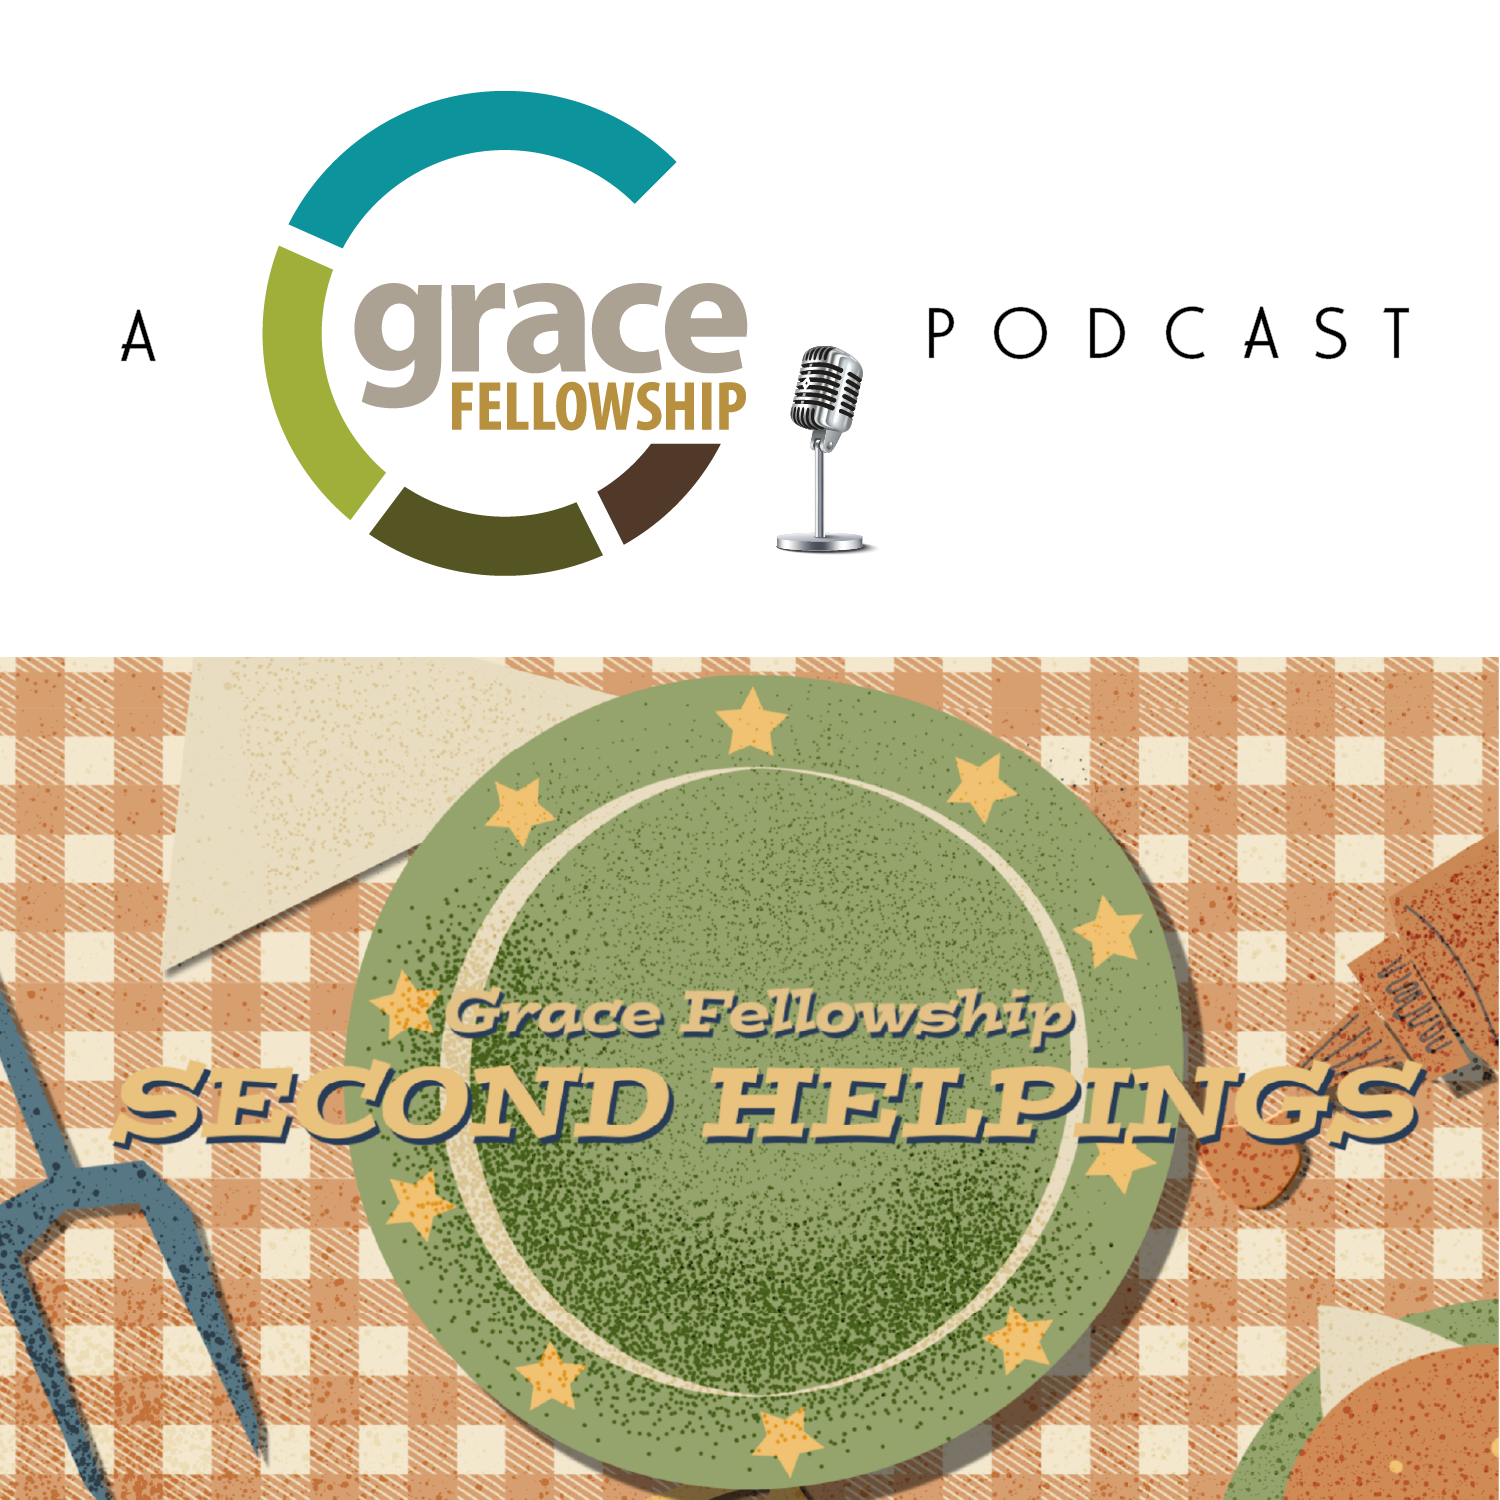 Artwork for Second Helpings: Grace Fellowship